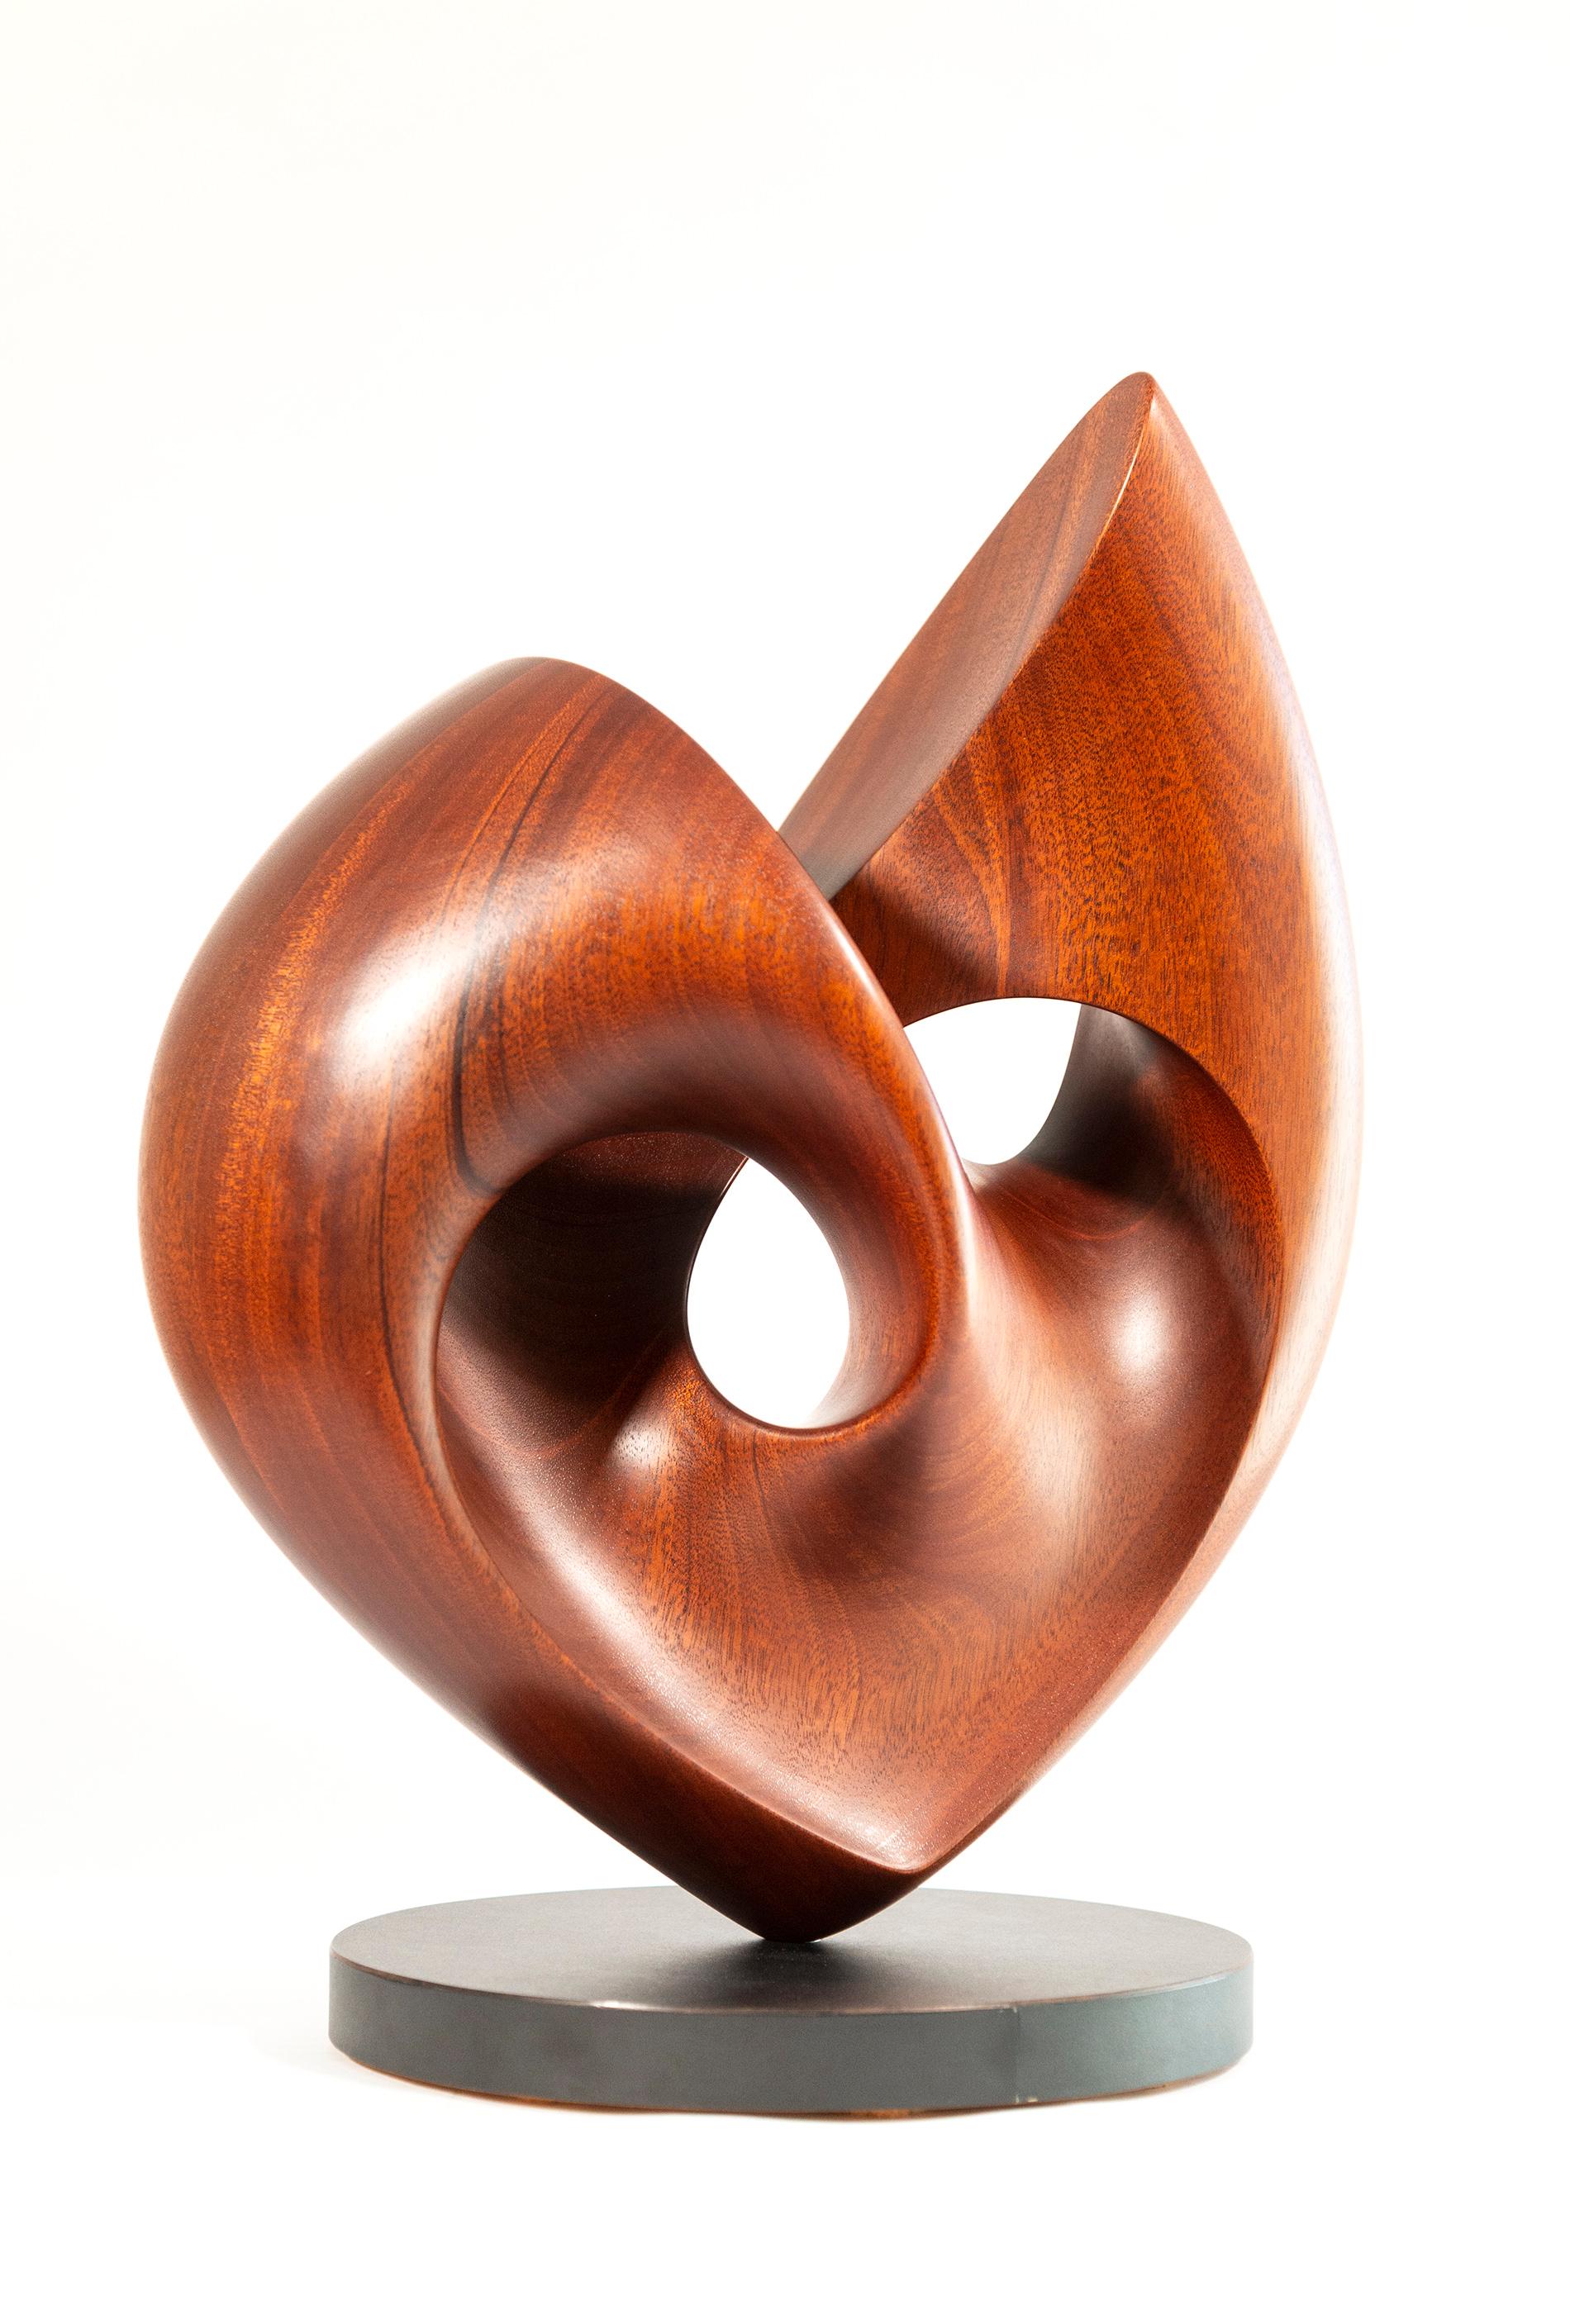 Senza Misura - smooth, polished, abstract, contemporary, mahogany sculpture For Sale 1